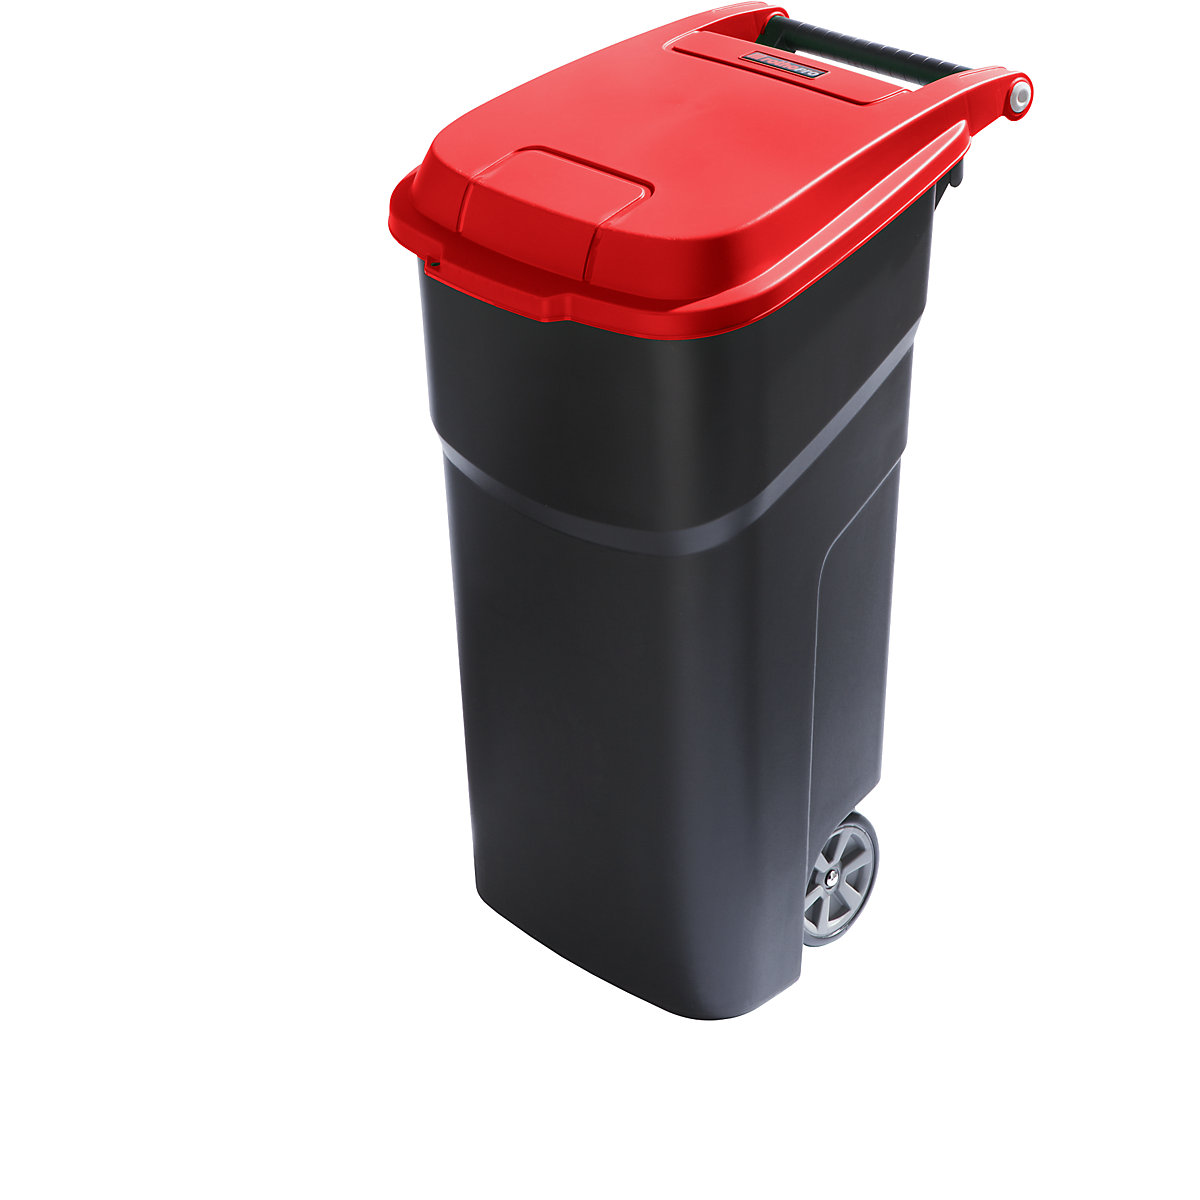 Polypropylene waste bin – rothopro, capacity 100 l, WxHxD 440 x 920 x 590 mm, mobile, red lid, 5+ items-8